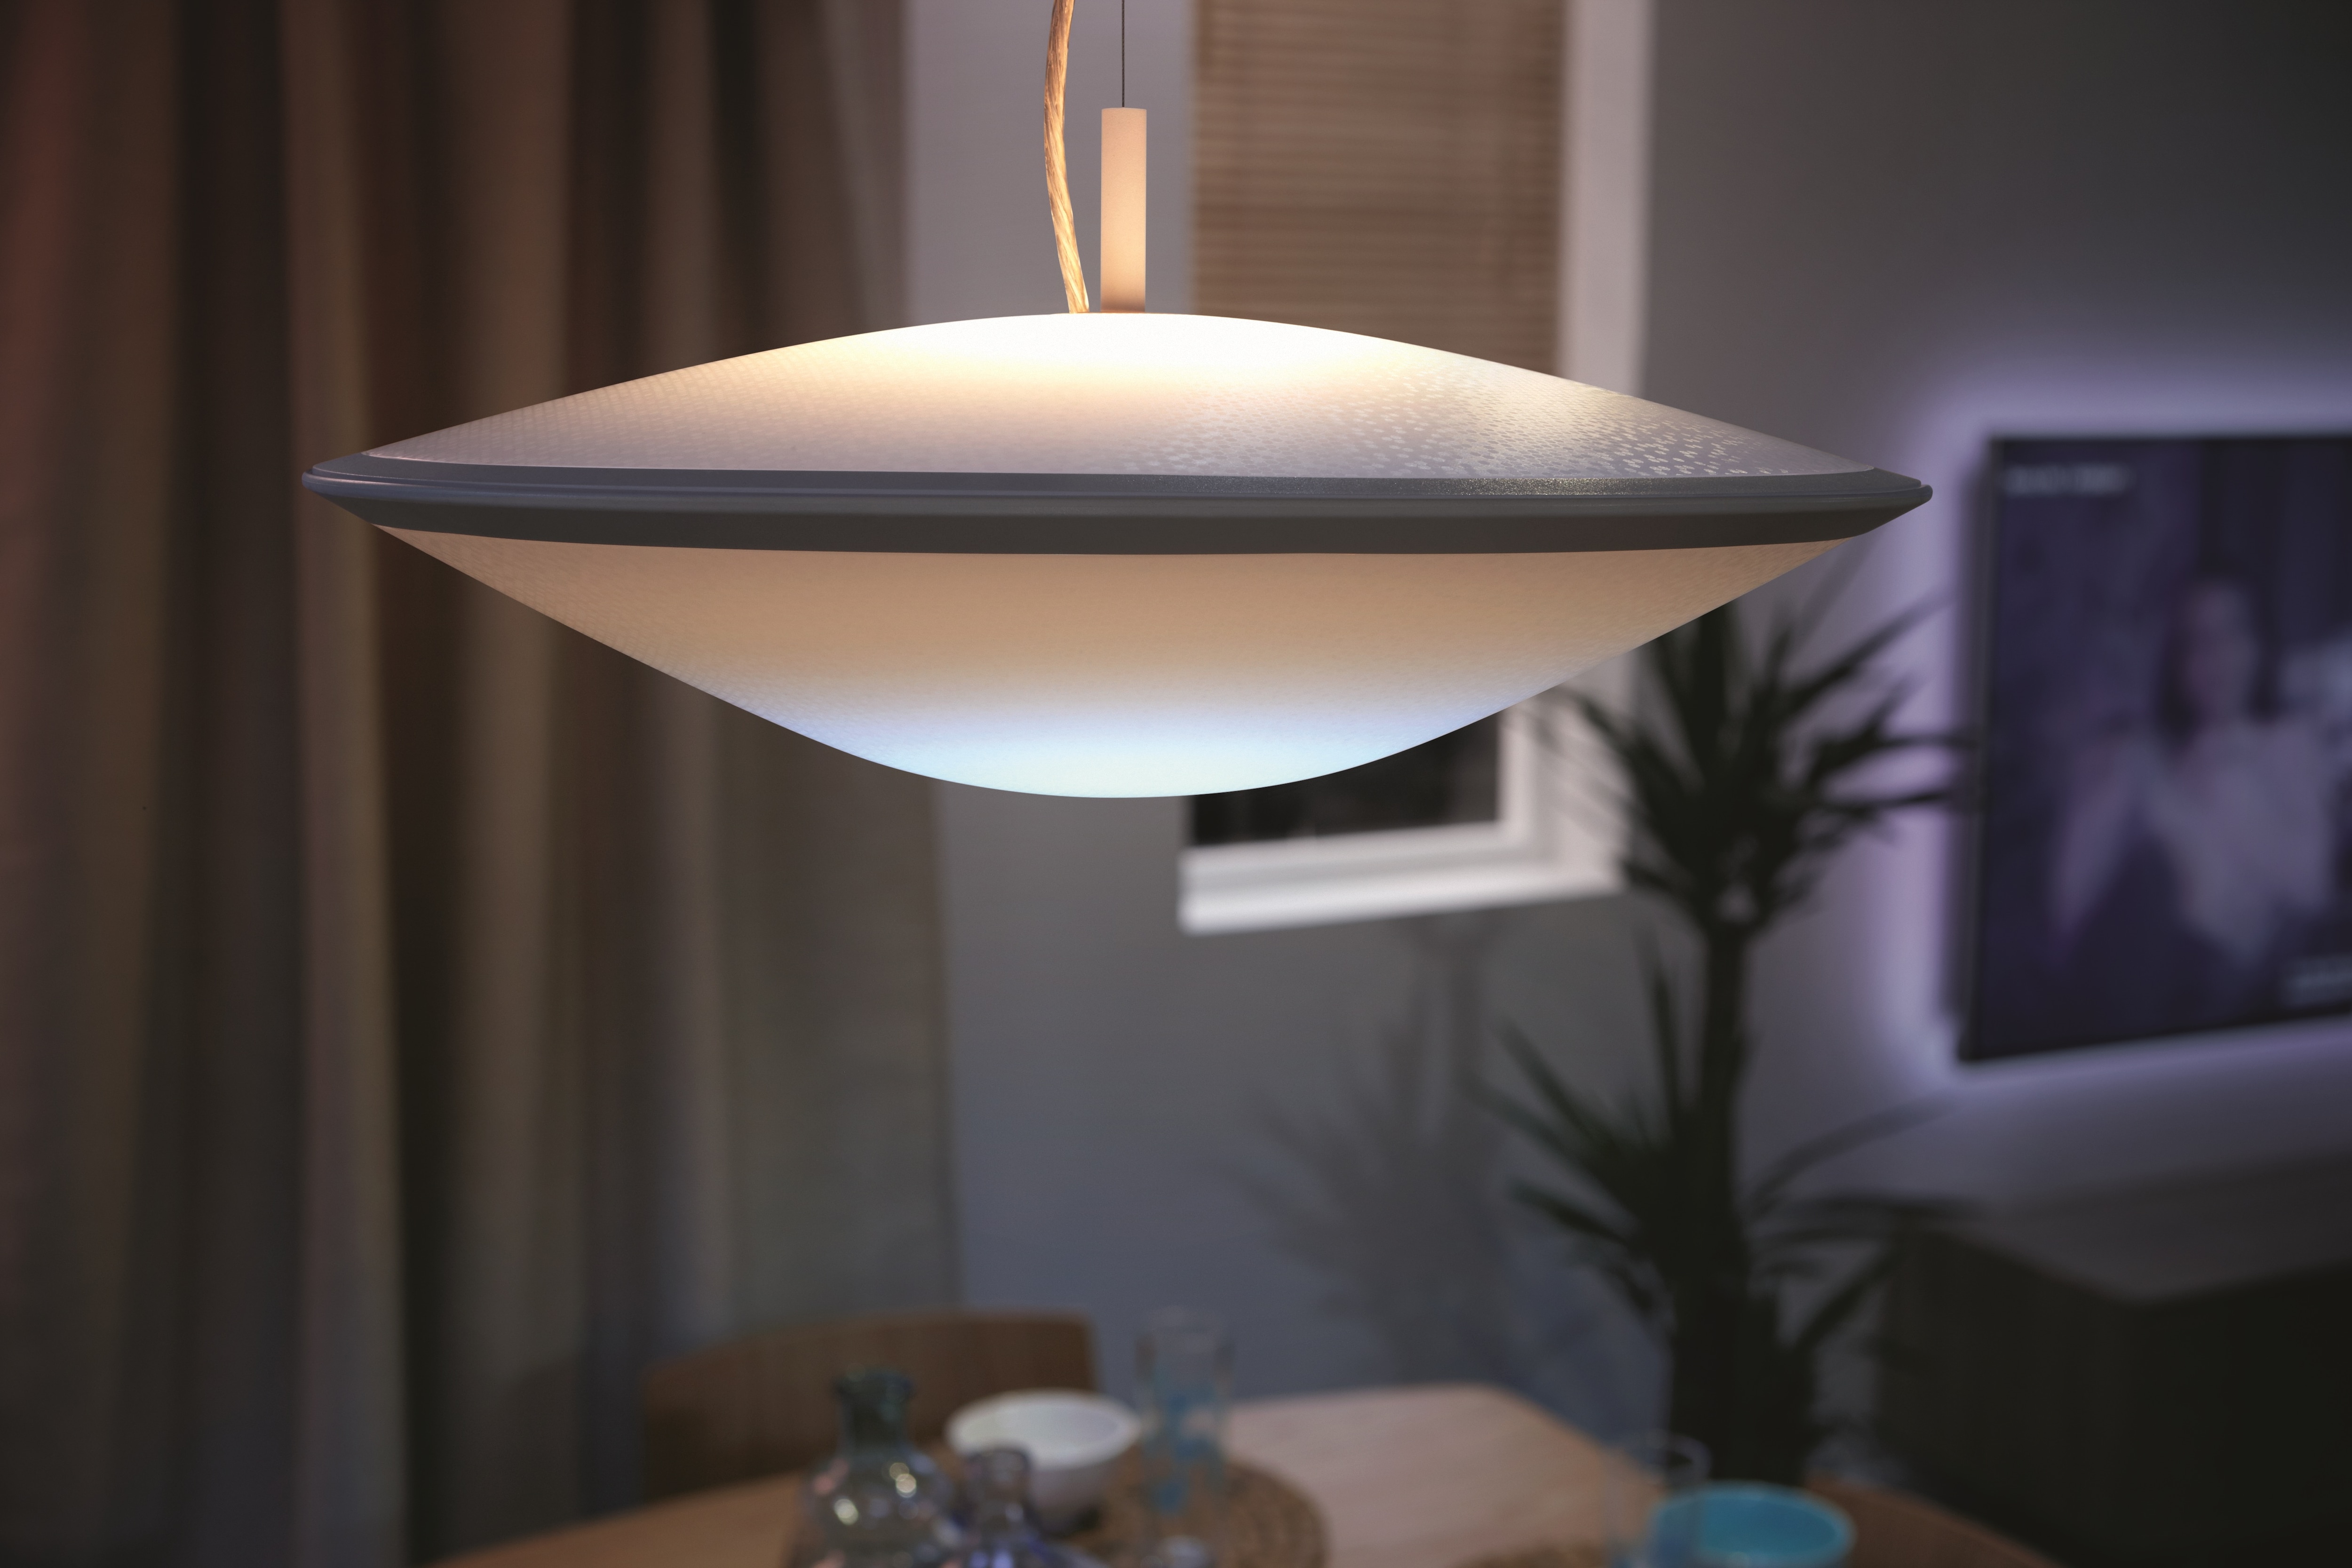 Simple, chic white: Philips Hue Phoenix delivers every shade of white light